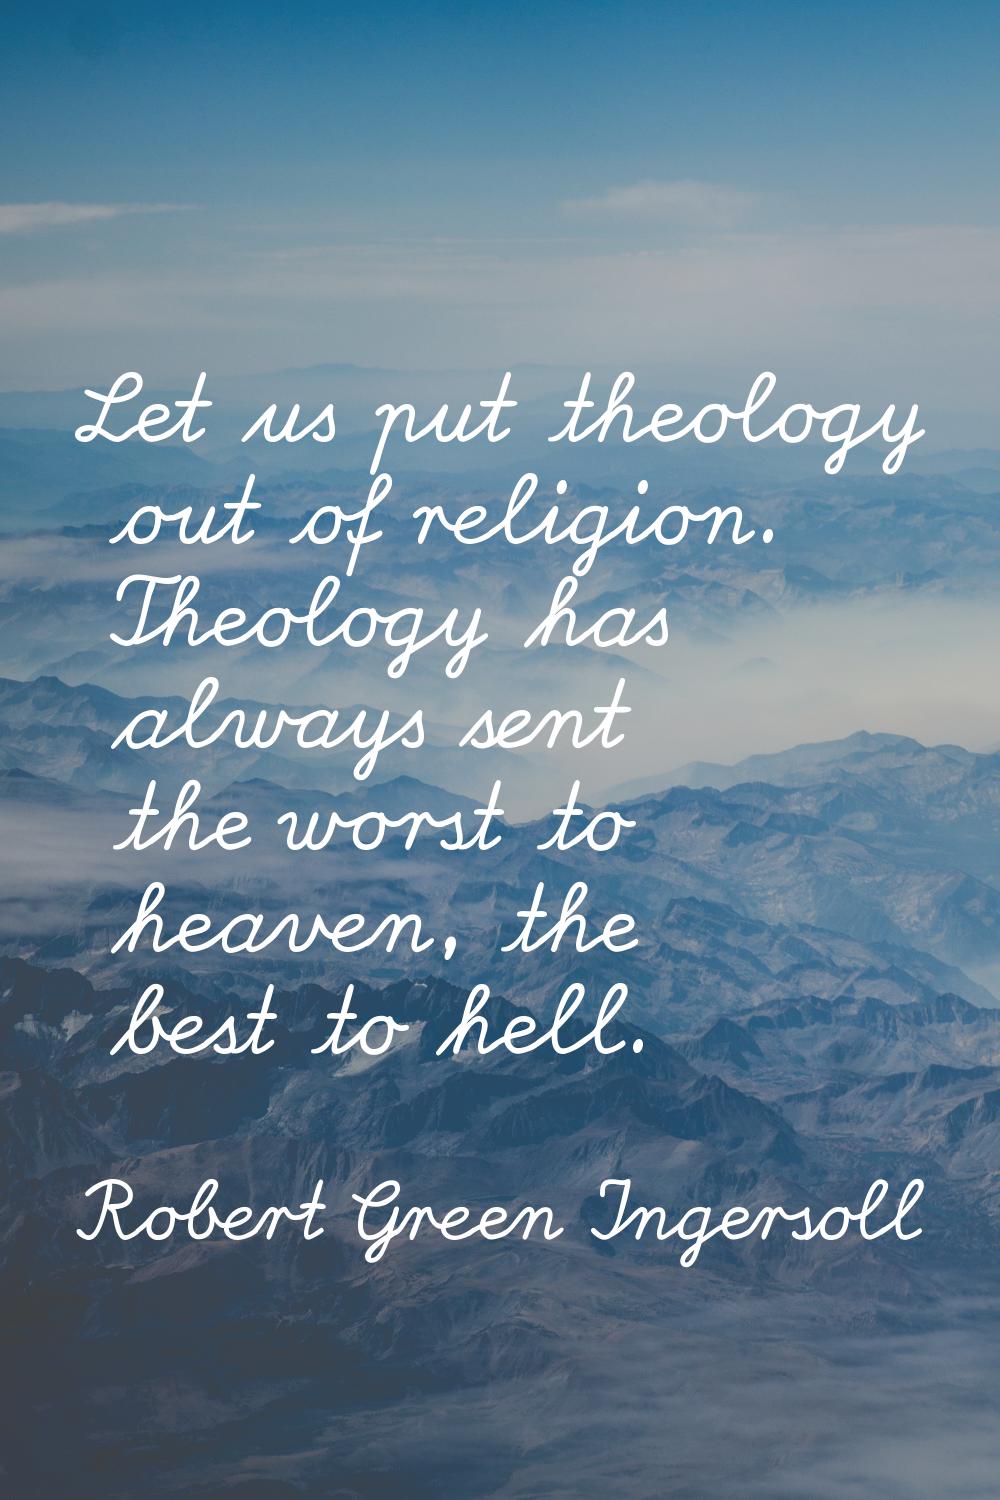 Let us put theology out of religion. Theology has always sent the worst to heaven, the best to hell